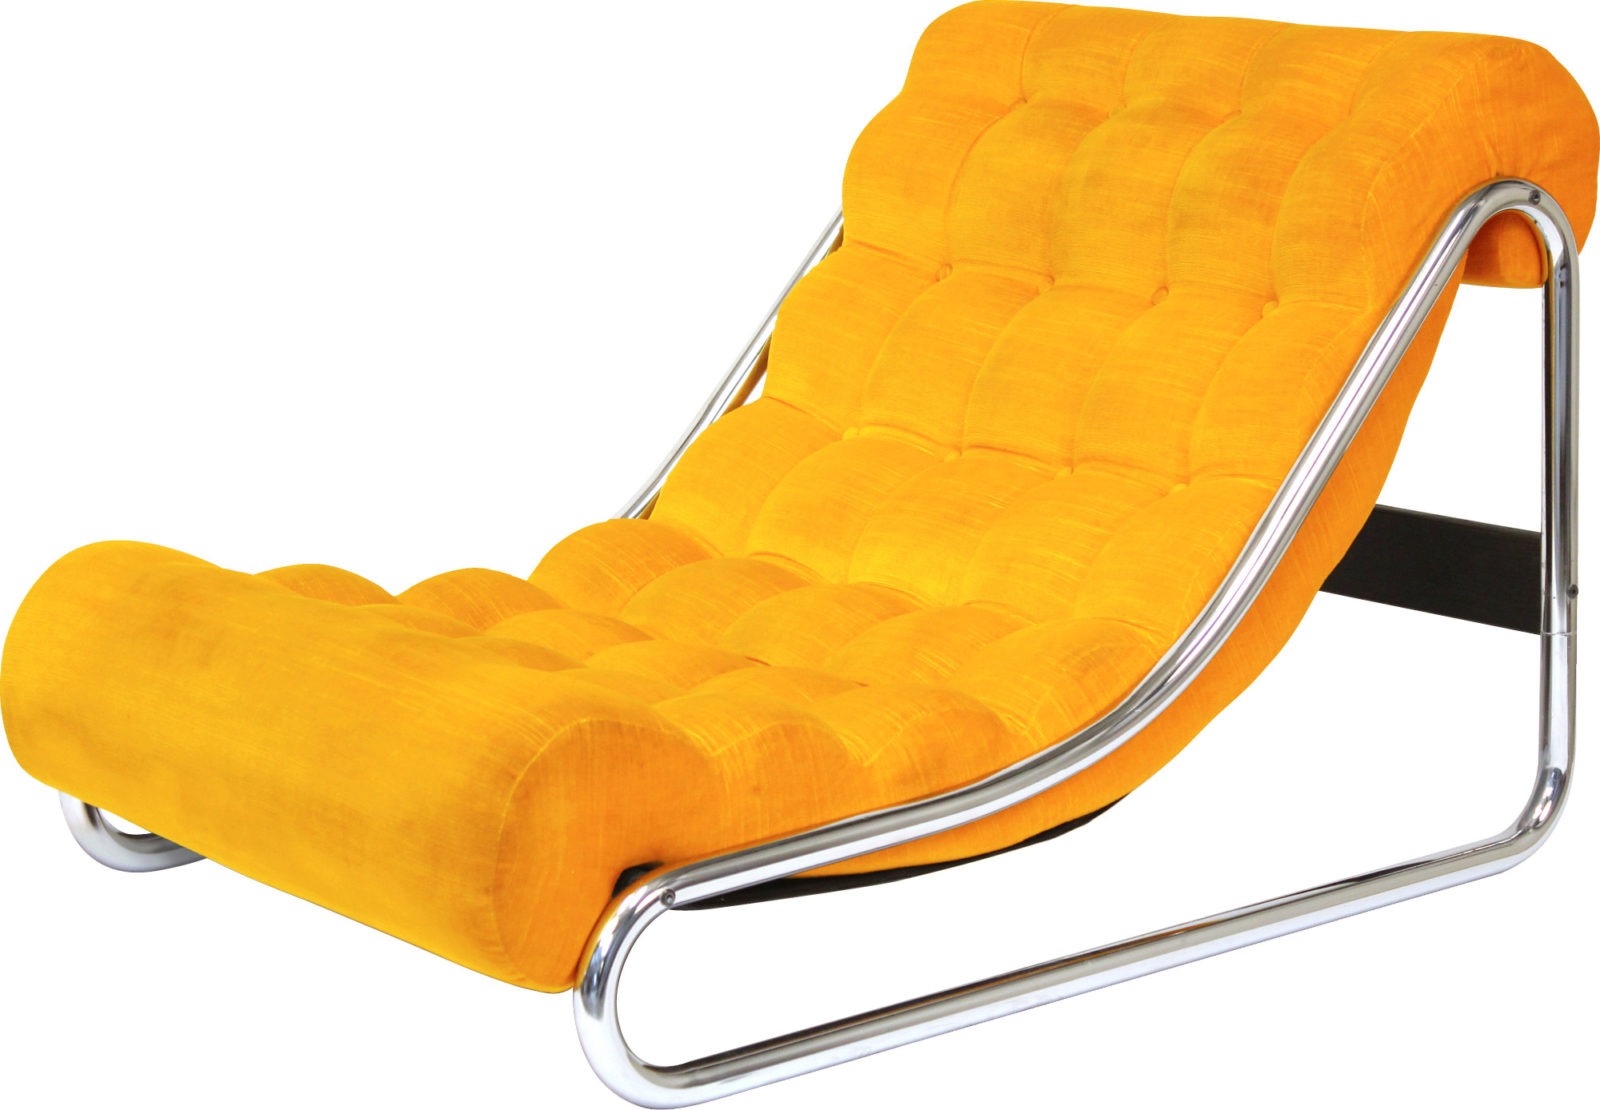 Lounge chair with chrome base and a sloped seat with yellow quilted fabric, IMPALA.